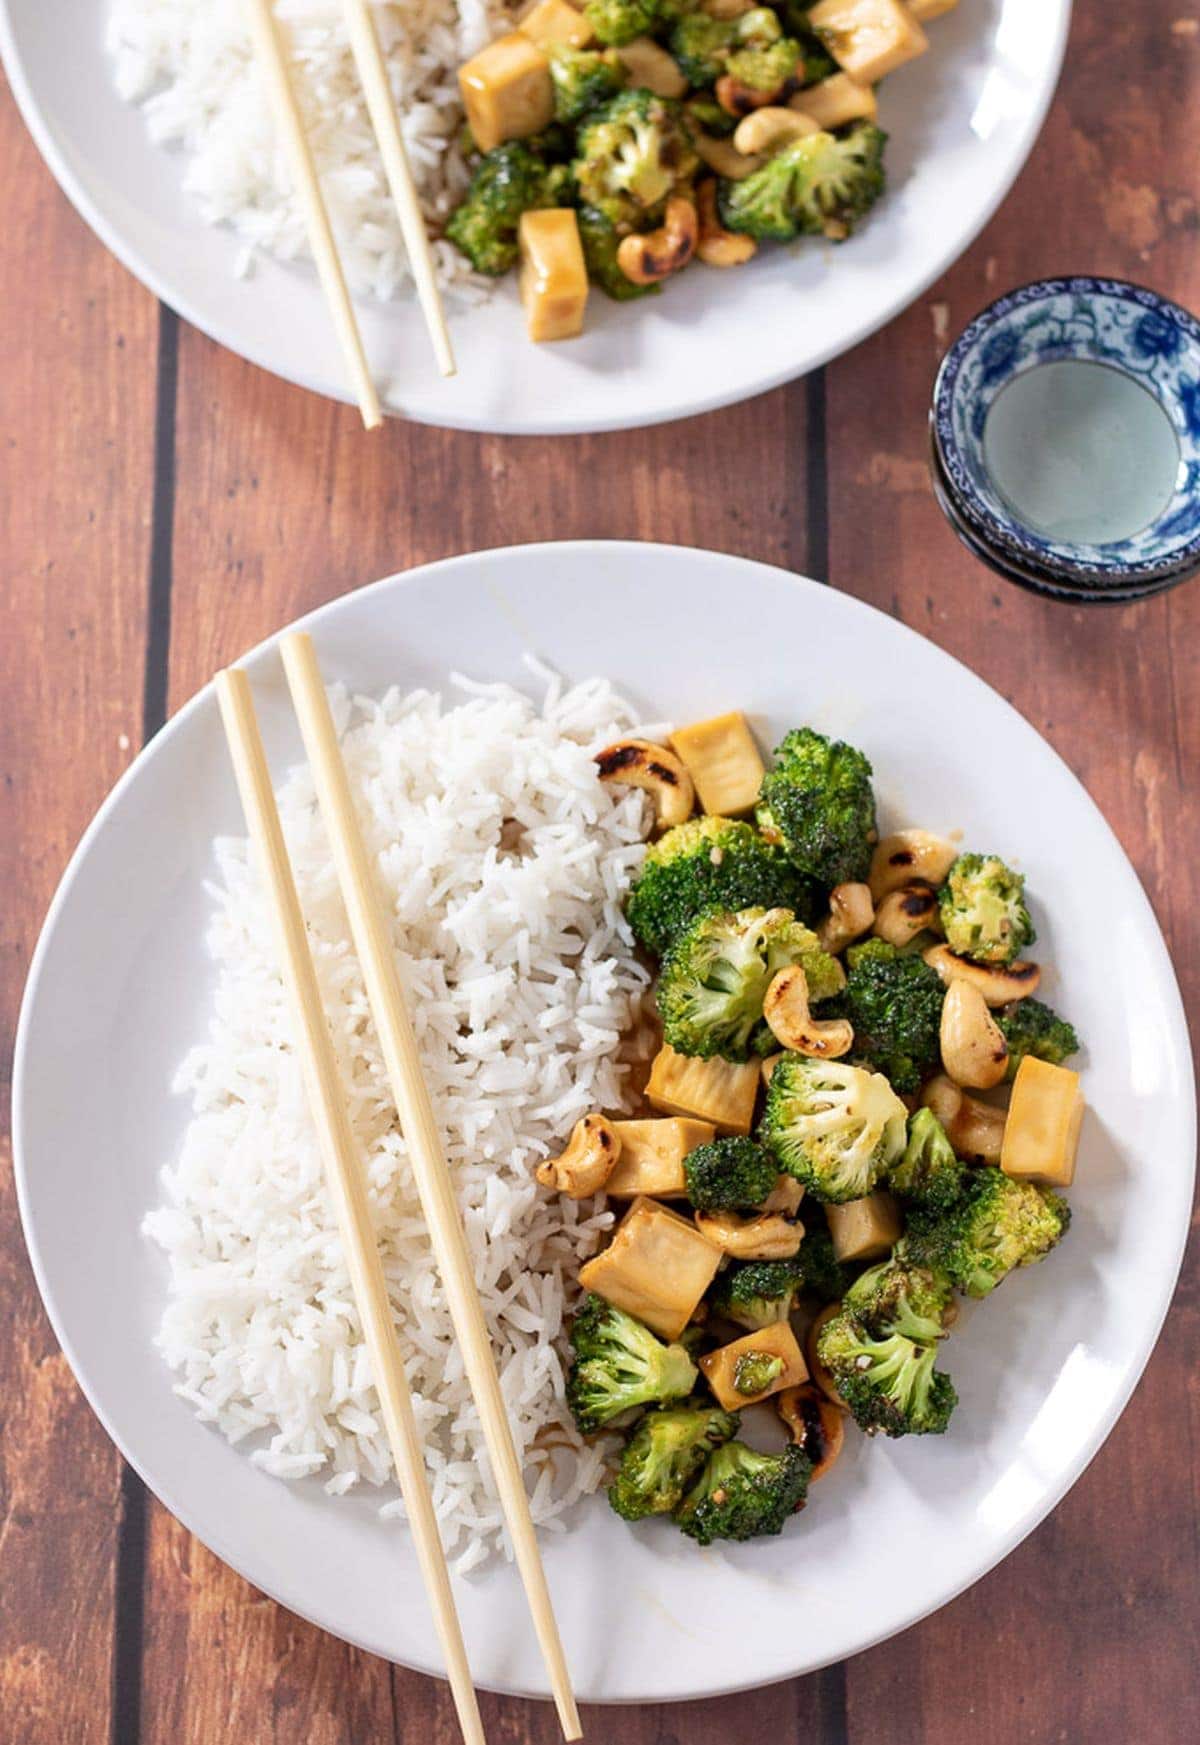 Birds eye view of two plates of sticky peanut butter tofu stir-fry served with rice and chop sticks placed over plates.